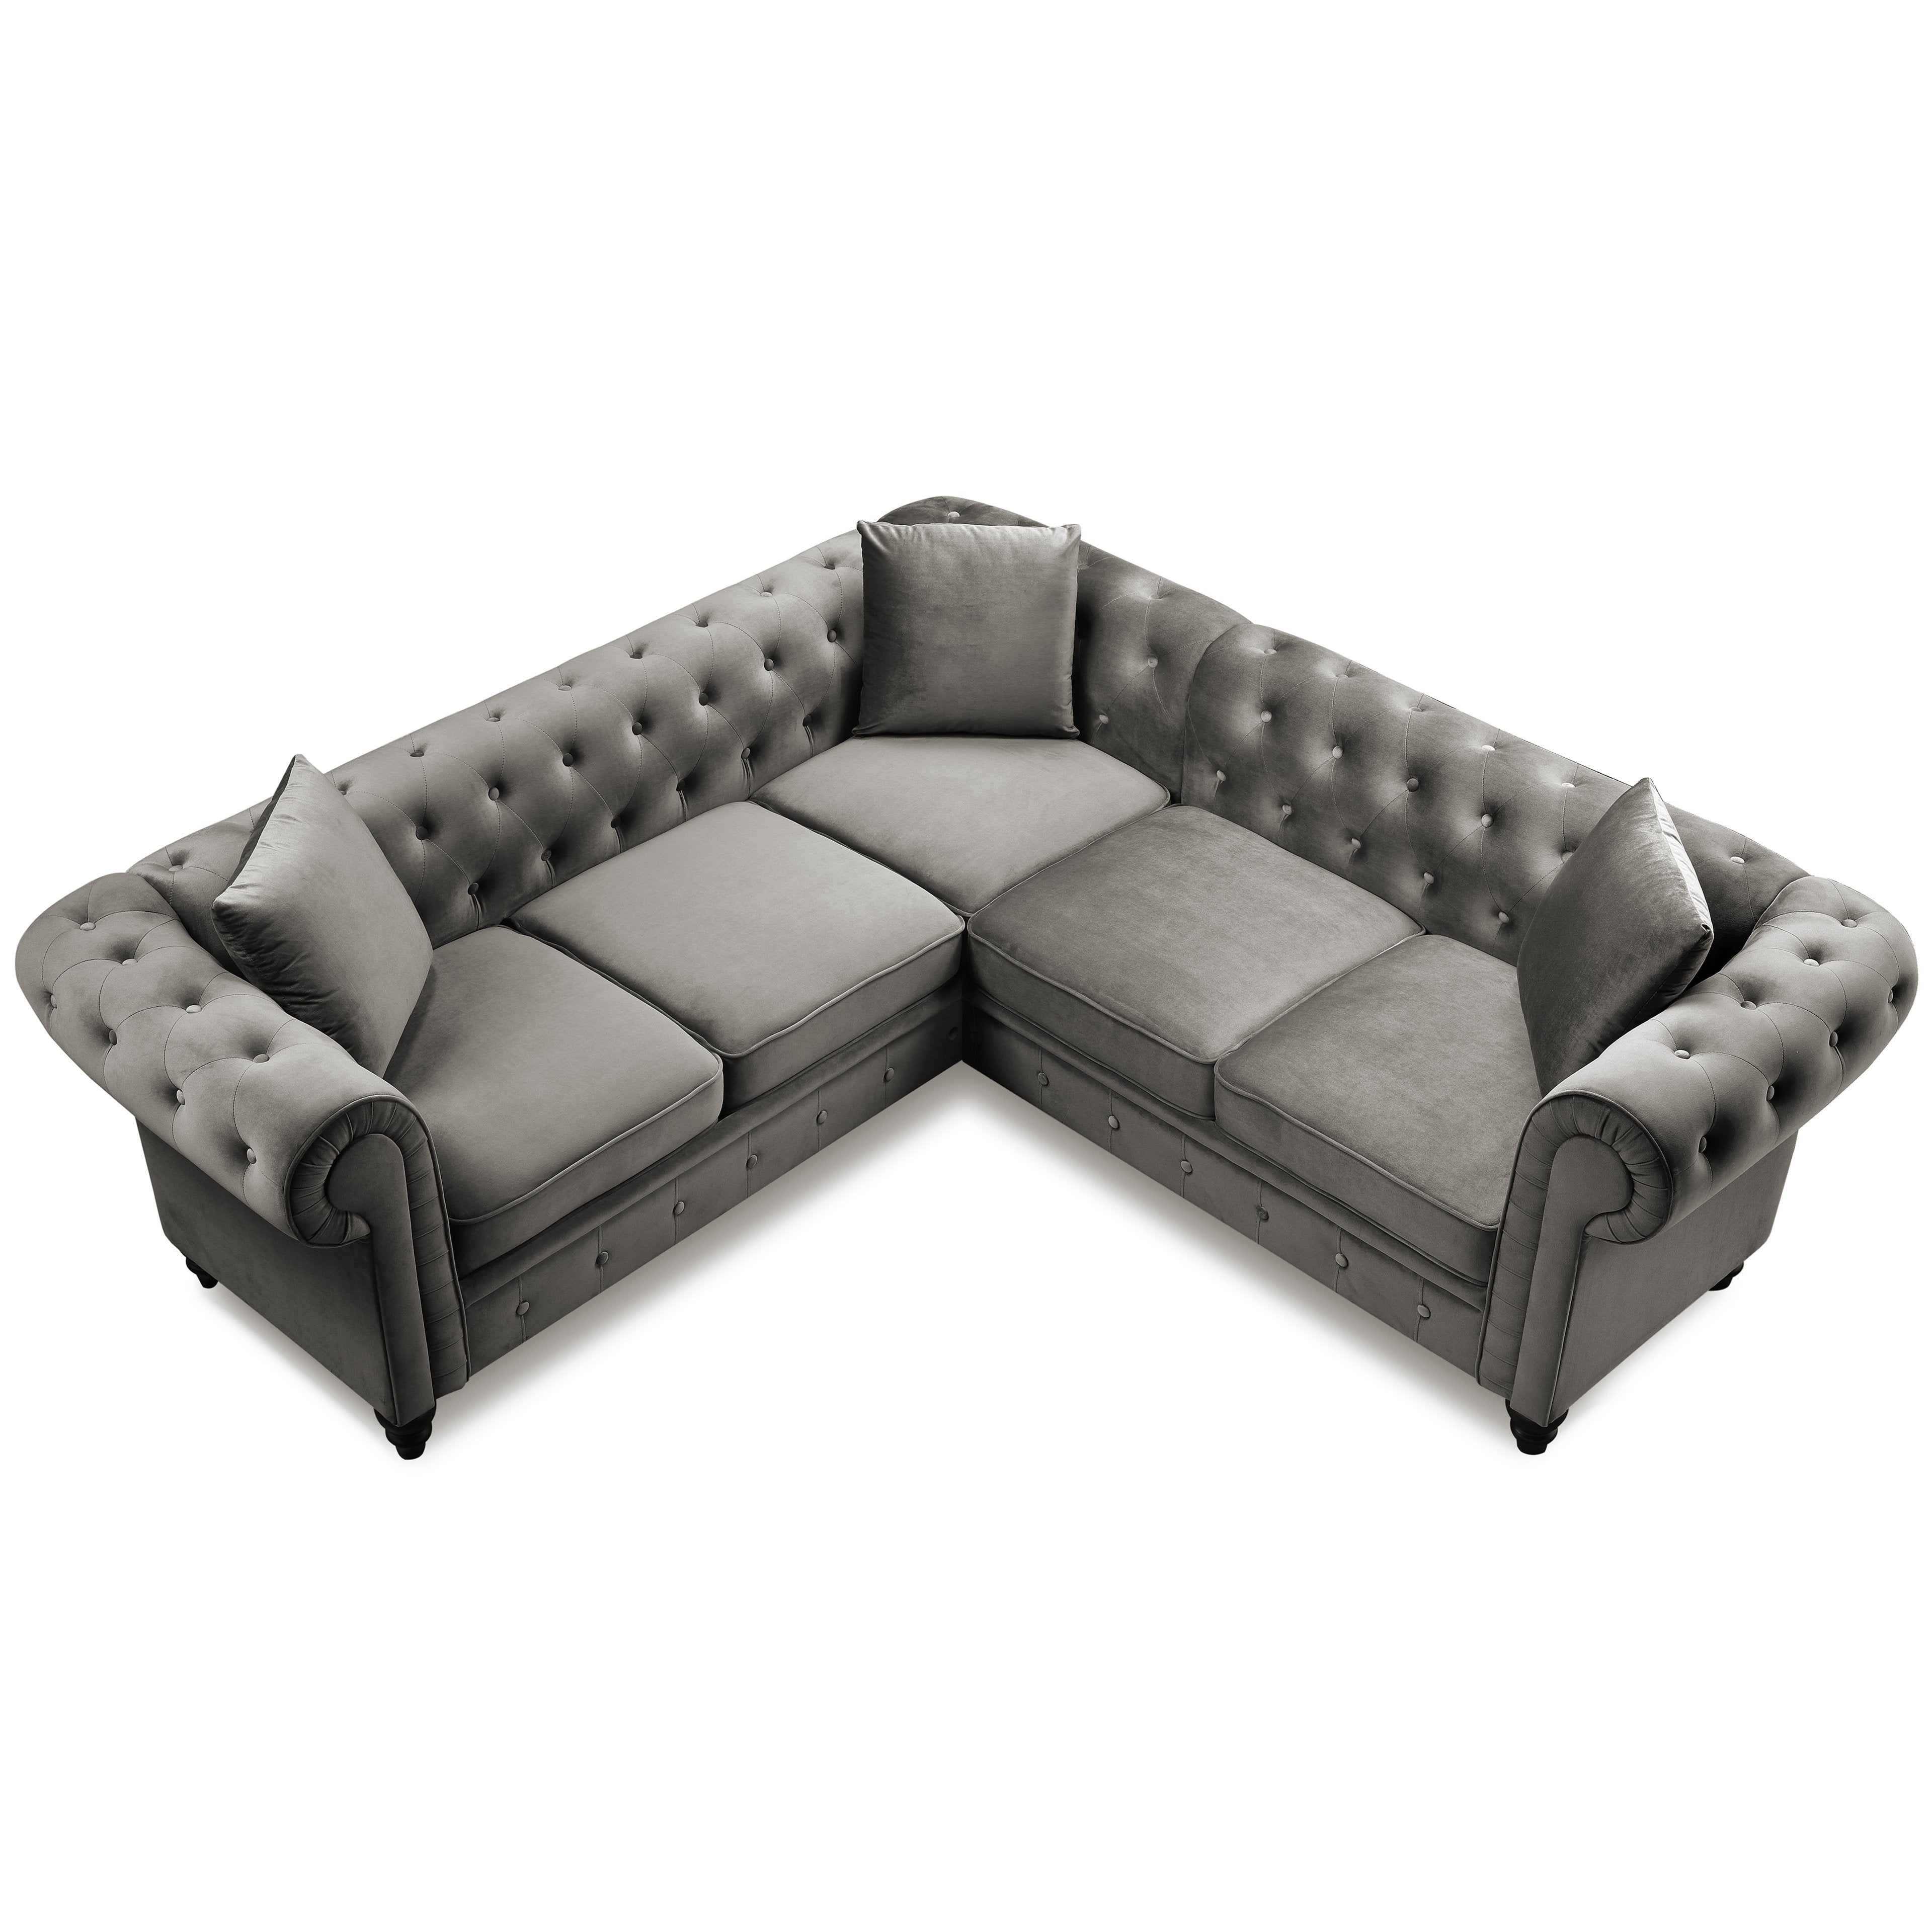 80*80*28" Deep Button Tufted Velvet Upholstered Rolled Arm Classic Chesterfield L Shaped Sectional Sofa 3 Pillows Included-Grey-Boyel Living